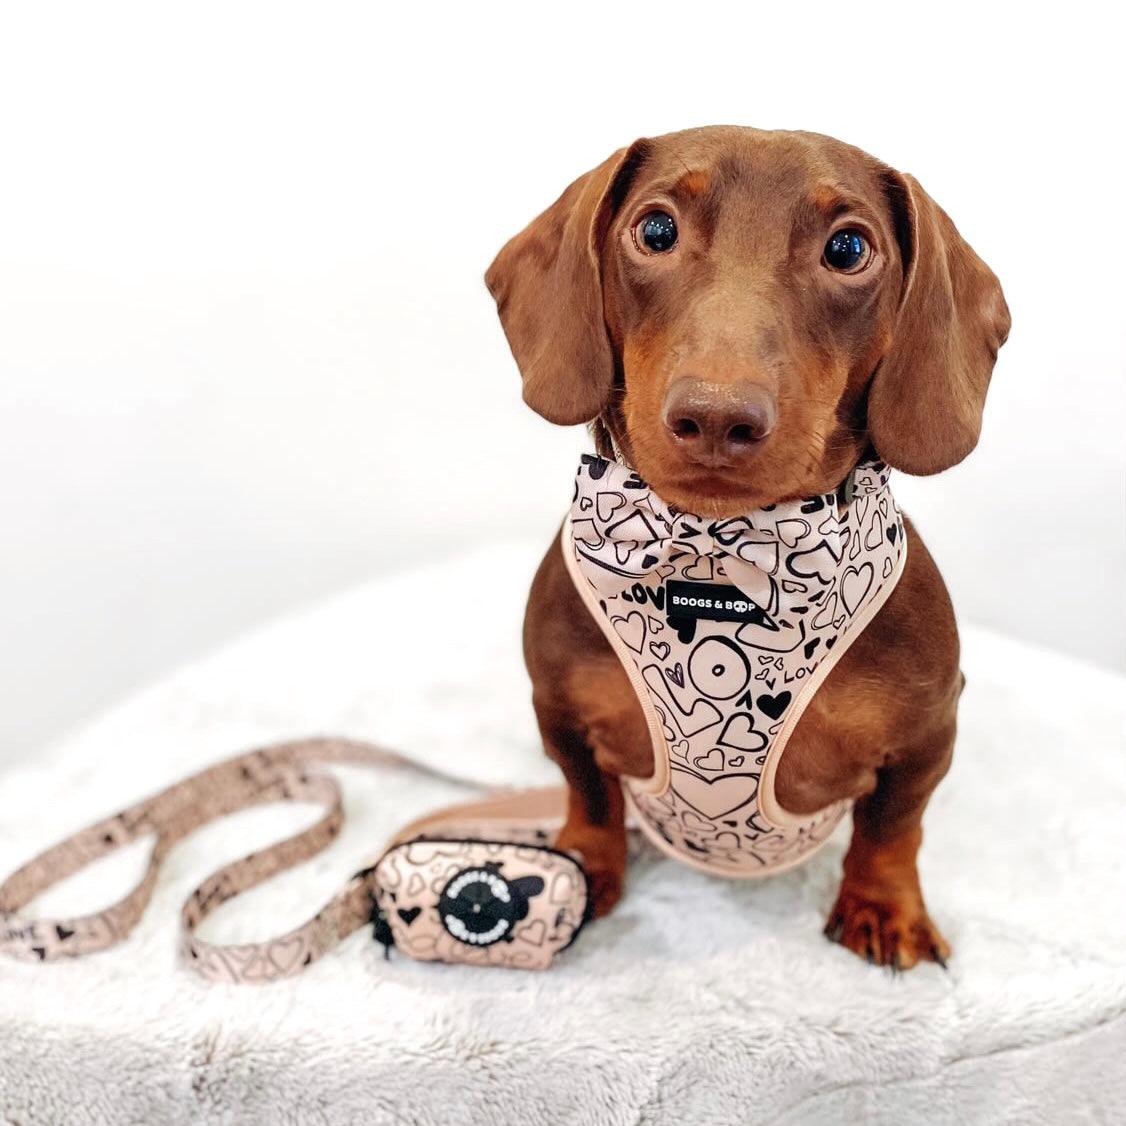 Dachshund Wearing Boogs & Boop Signature Harness and Walking Set.